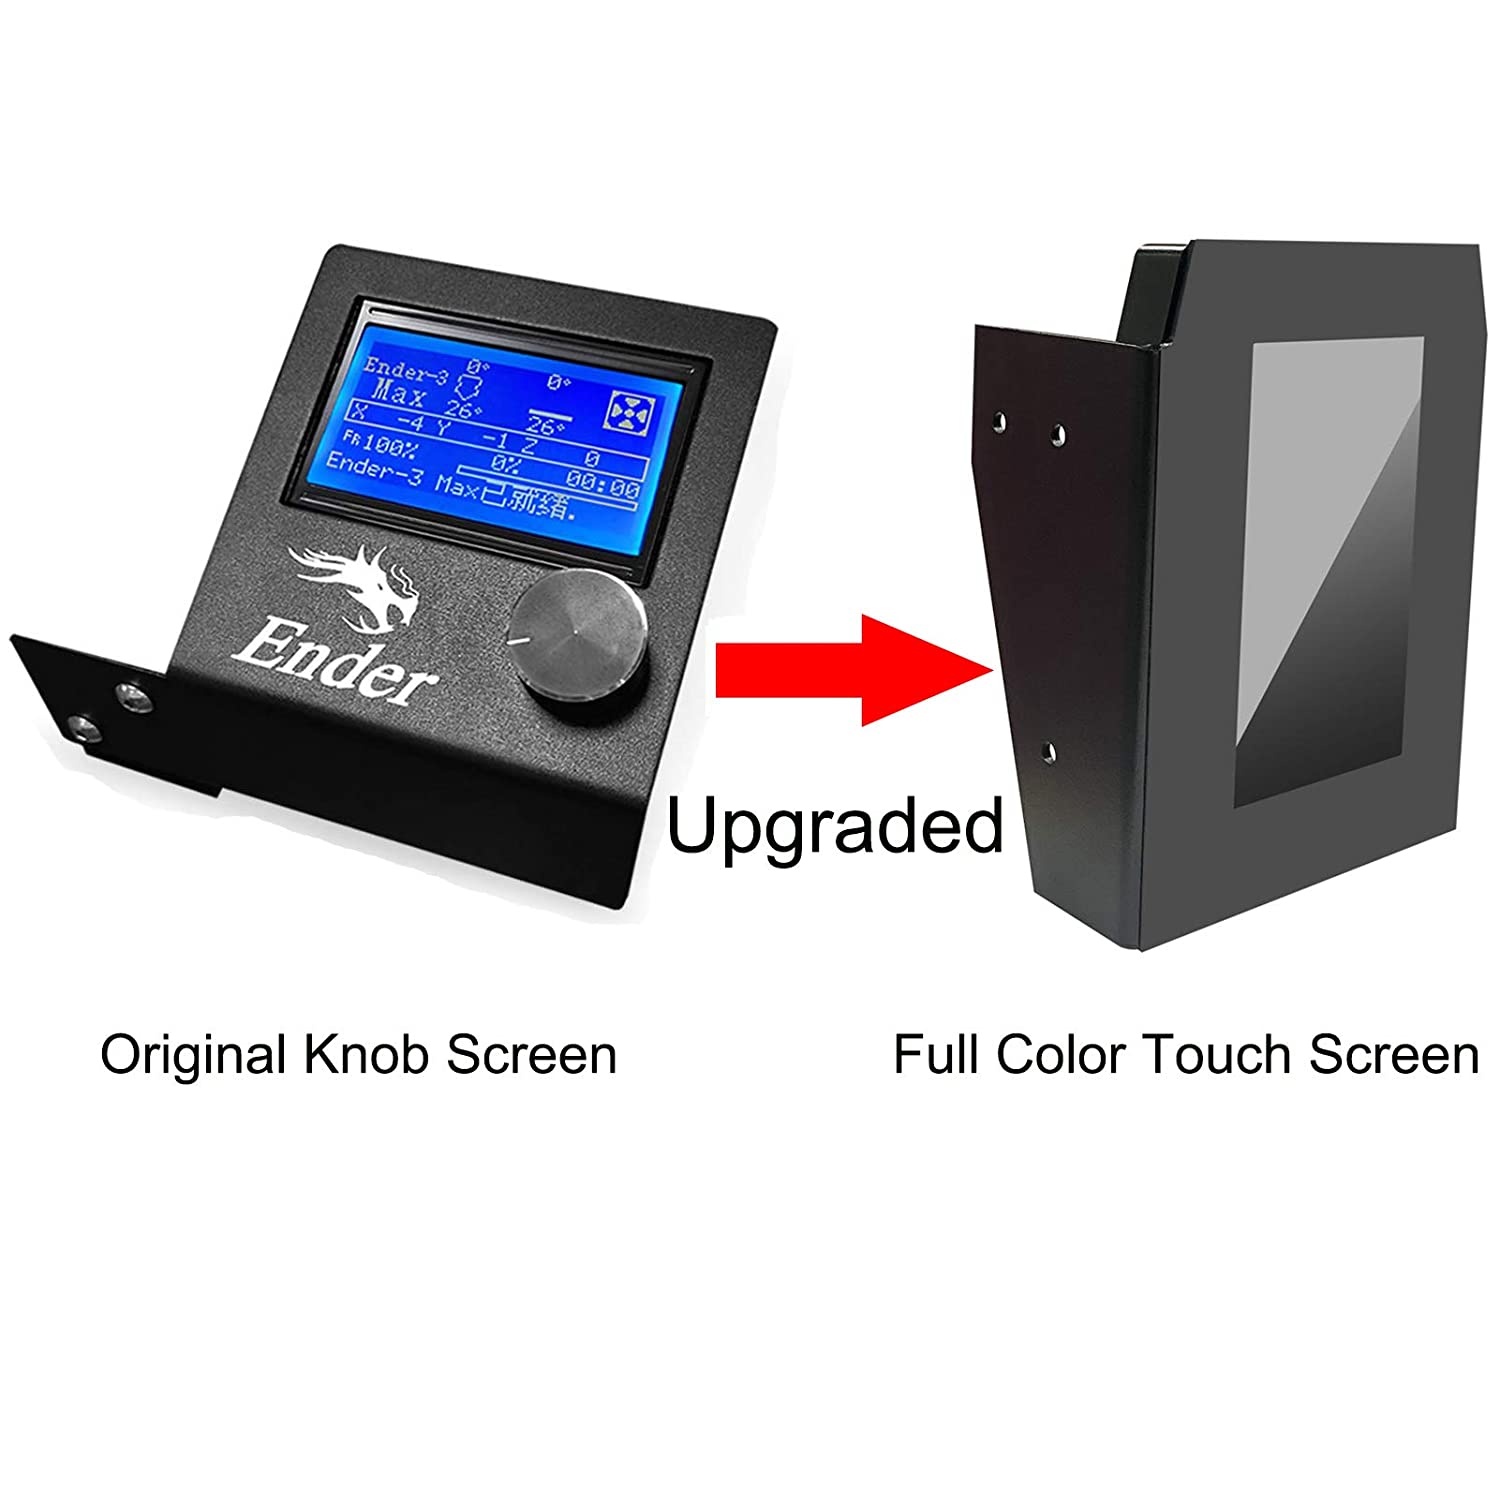 Creality 3D® Full Colour Touch Screen LCD Upgrade for Ender 3/Pro/V2